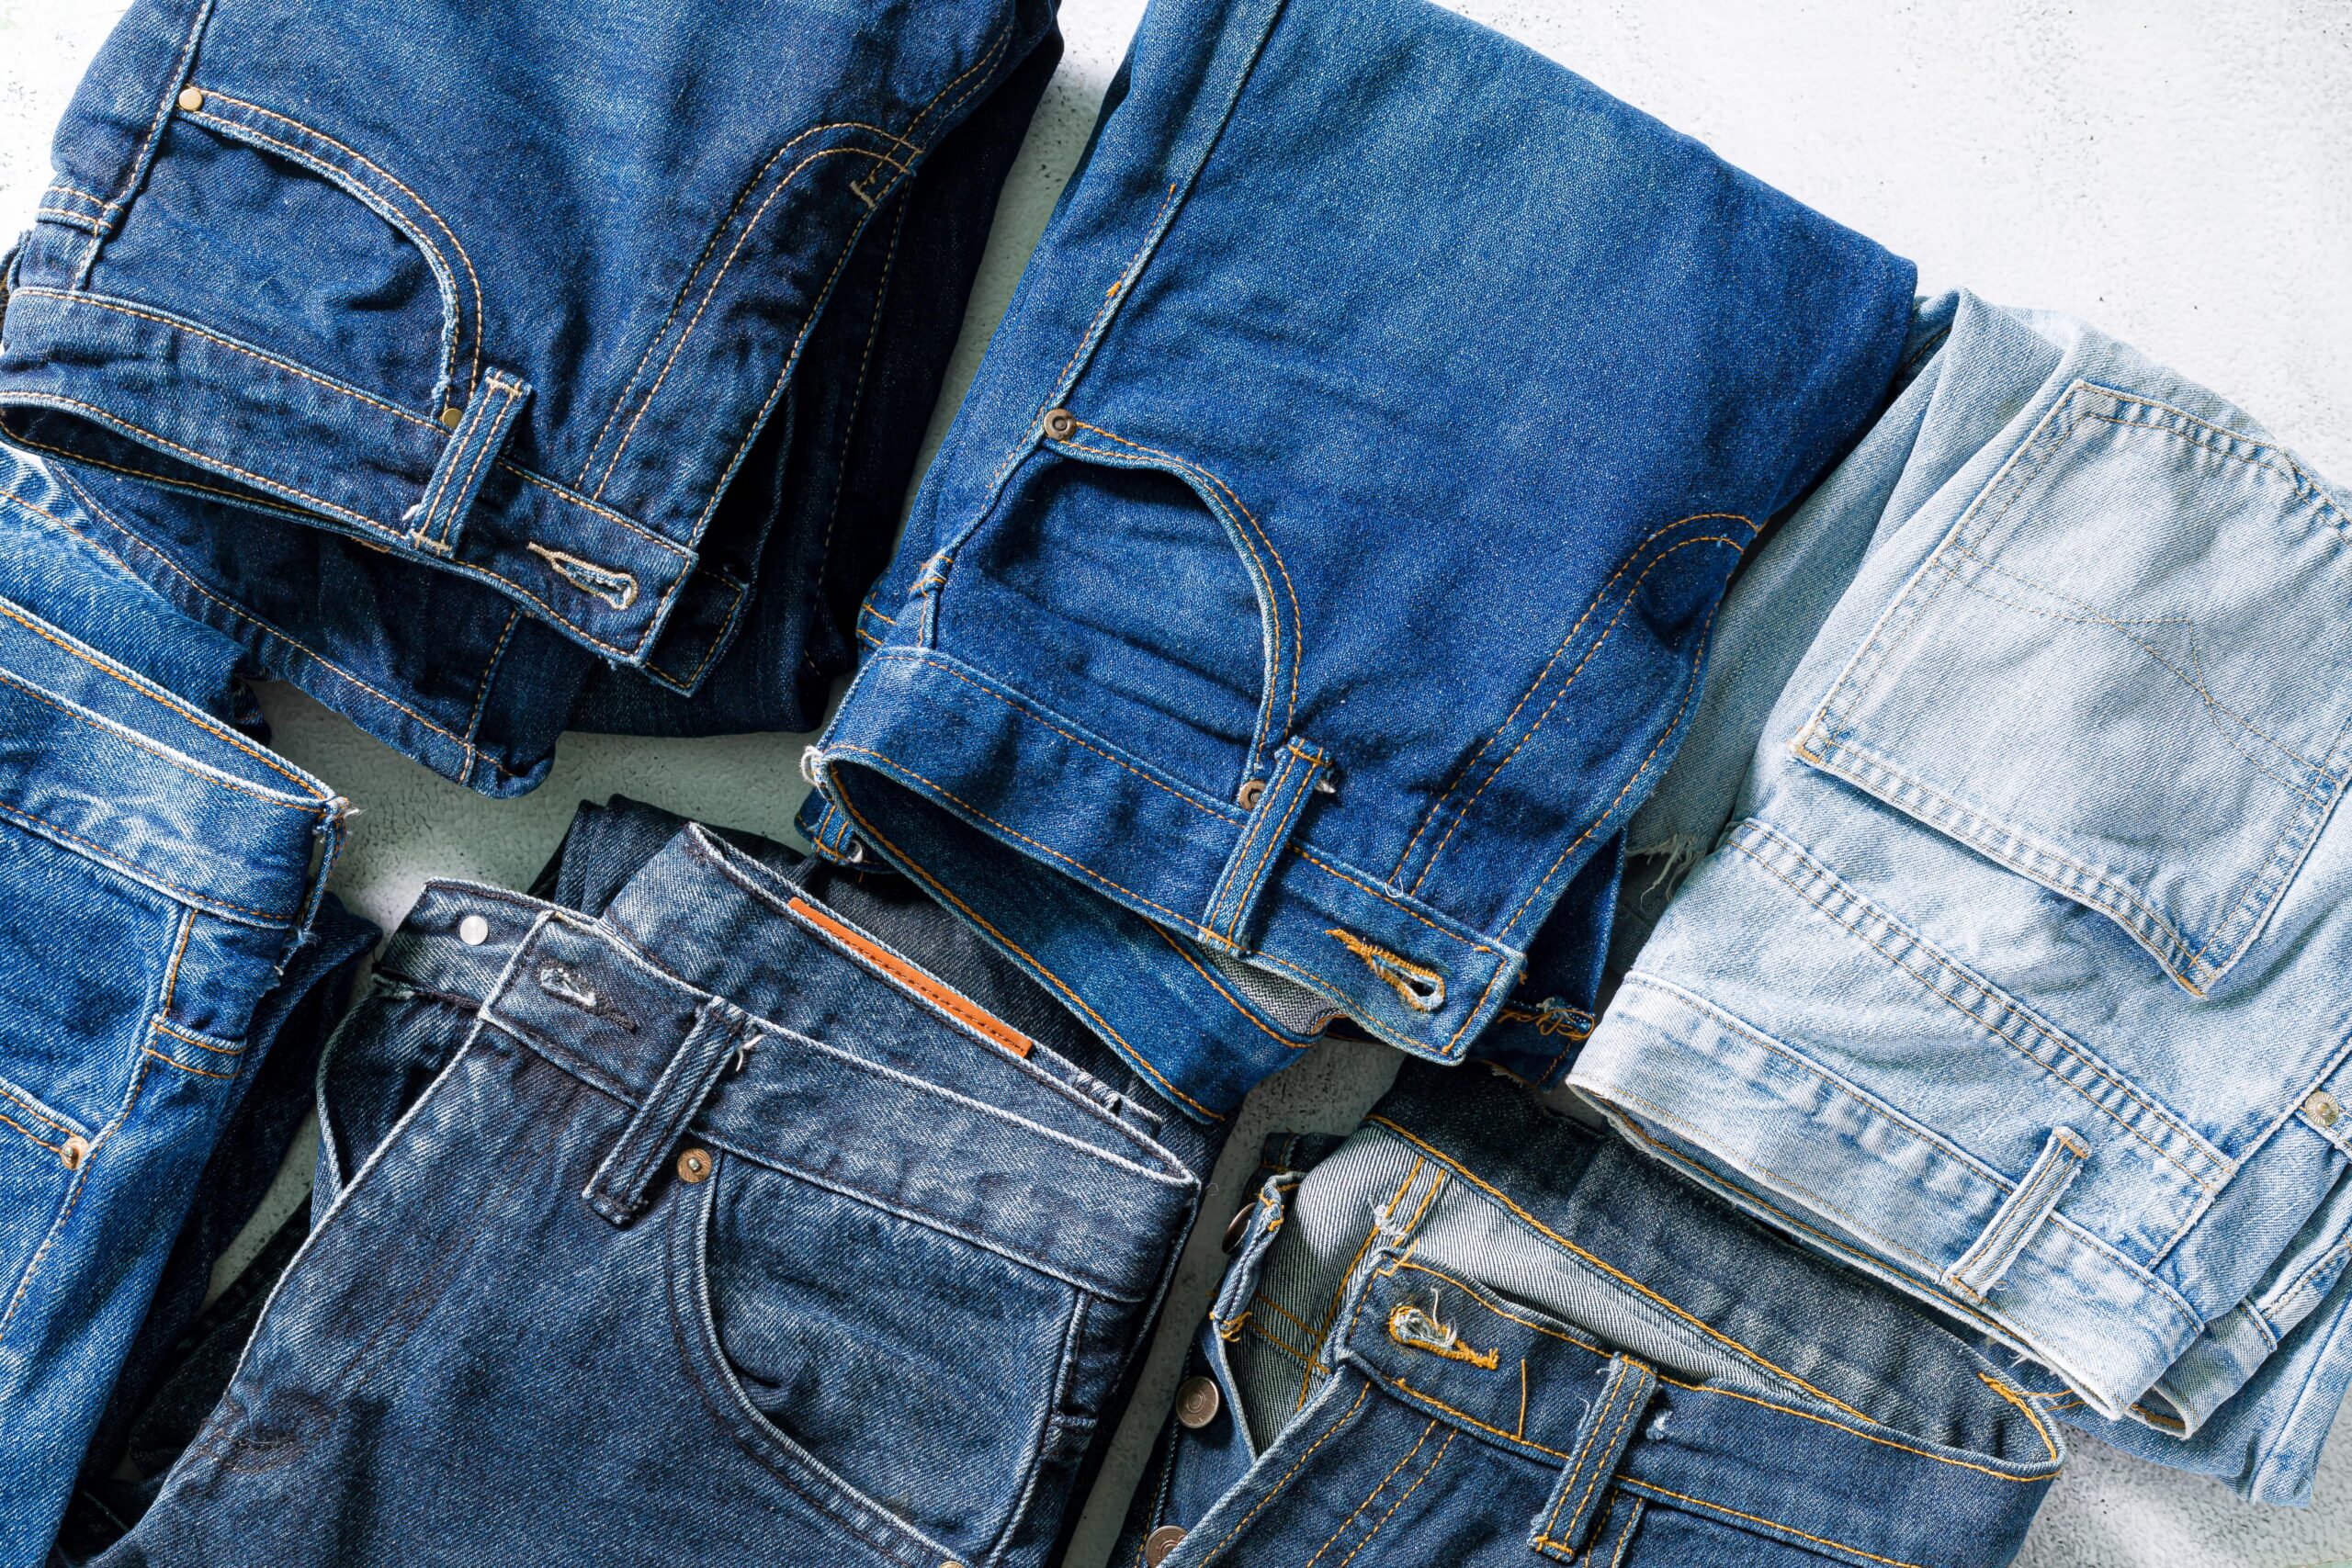 Women’s Jean Sizes Compared to Men’s: Ultimate Guide